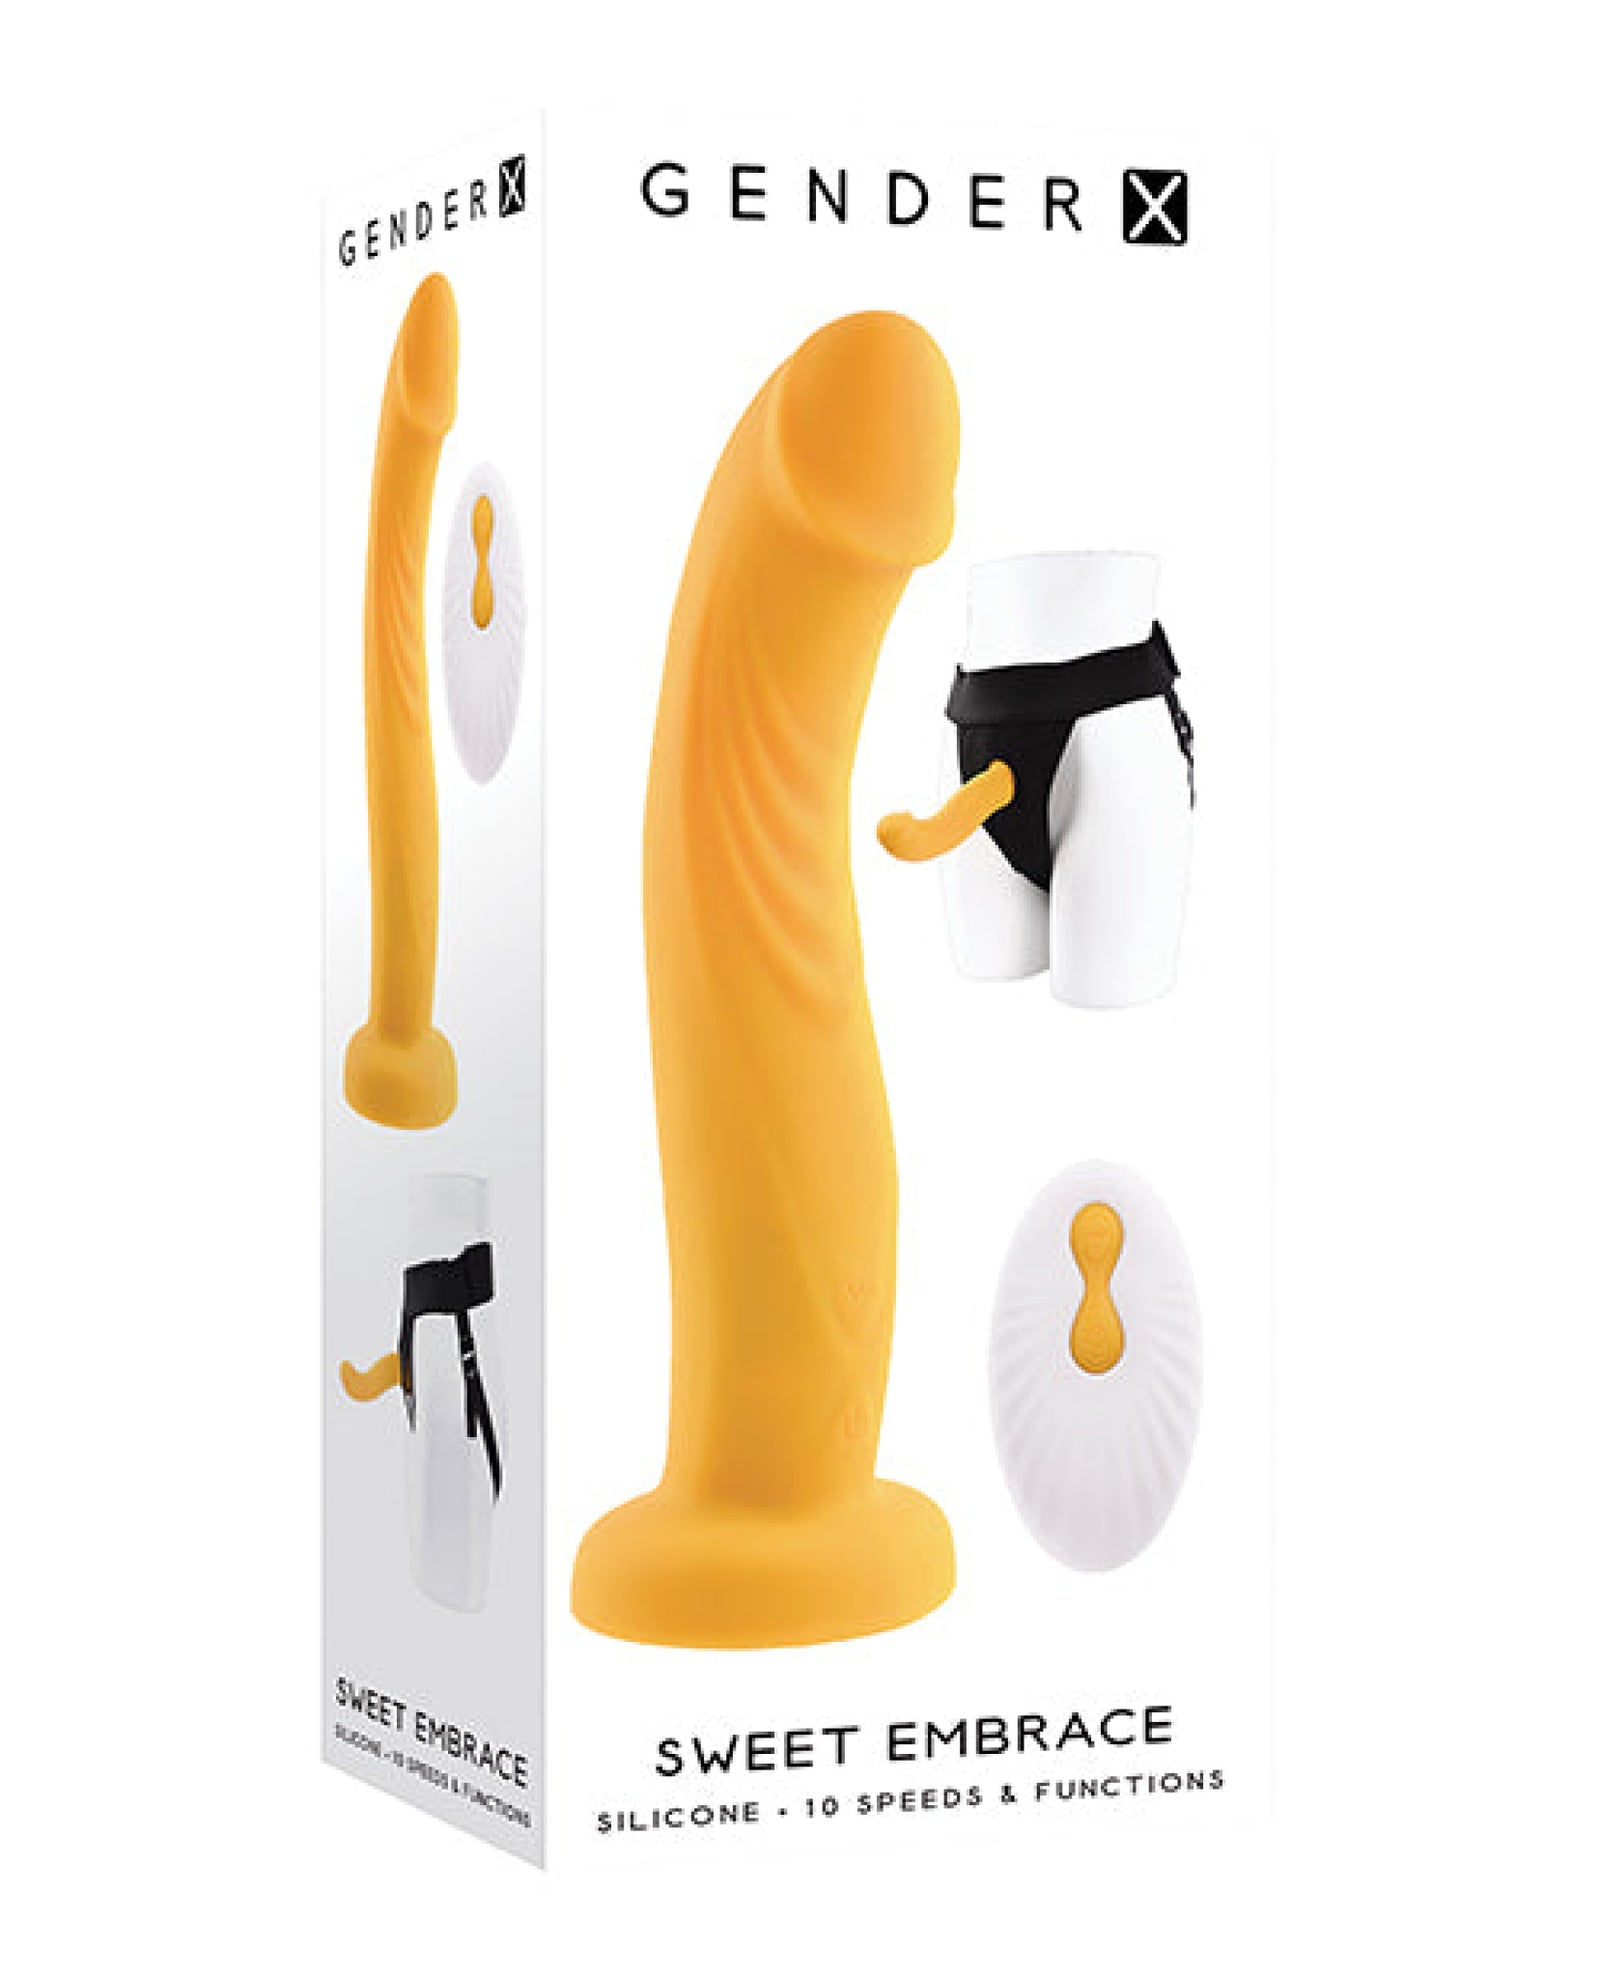 Gender X Sweet Embrace Dual Motor Strap On Vibe W-harness - Yellow Gender X